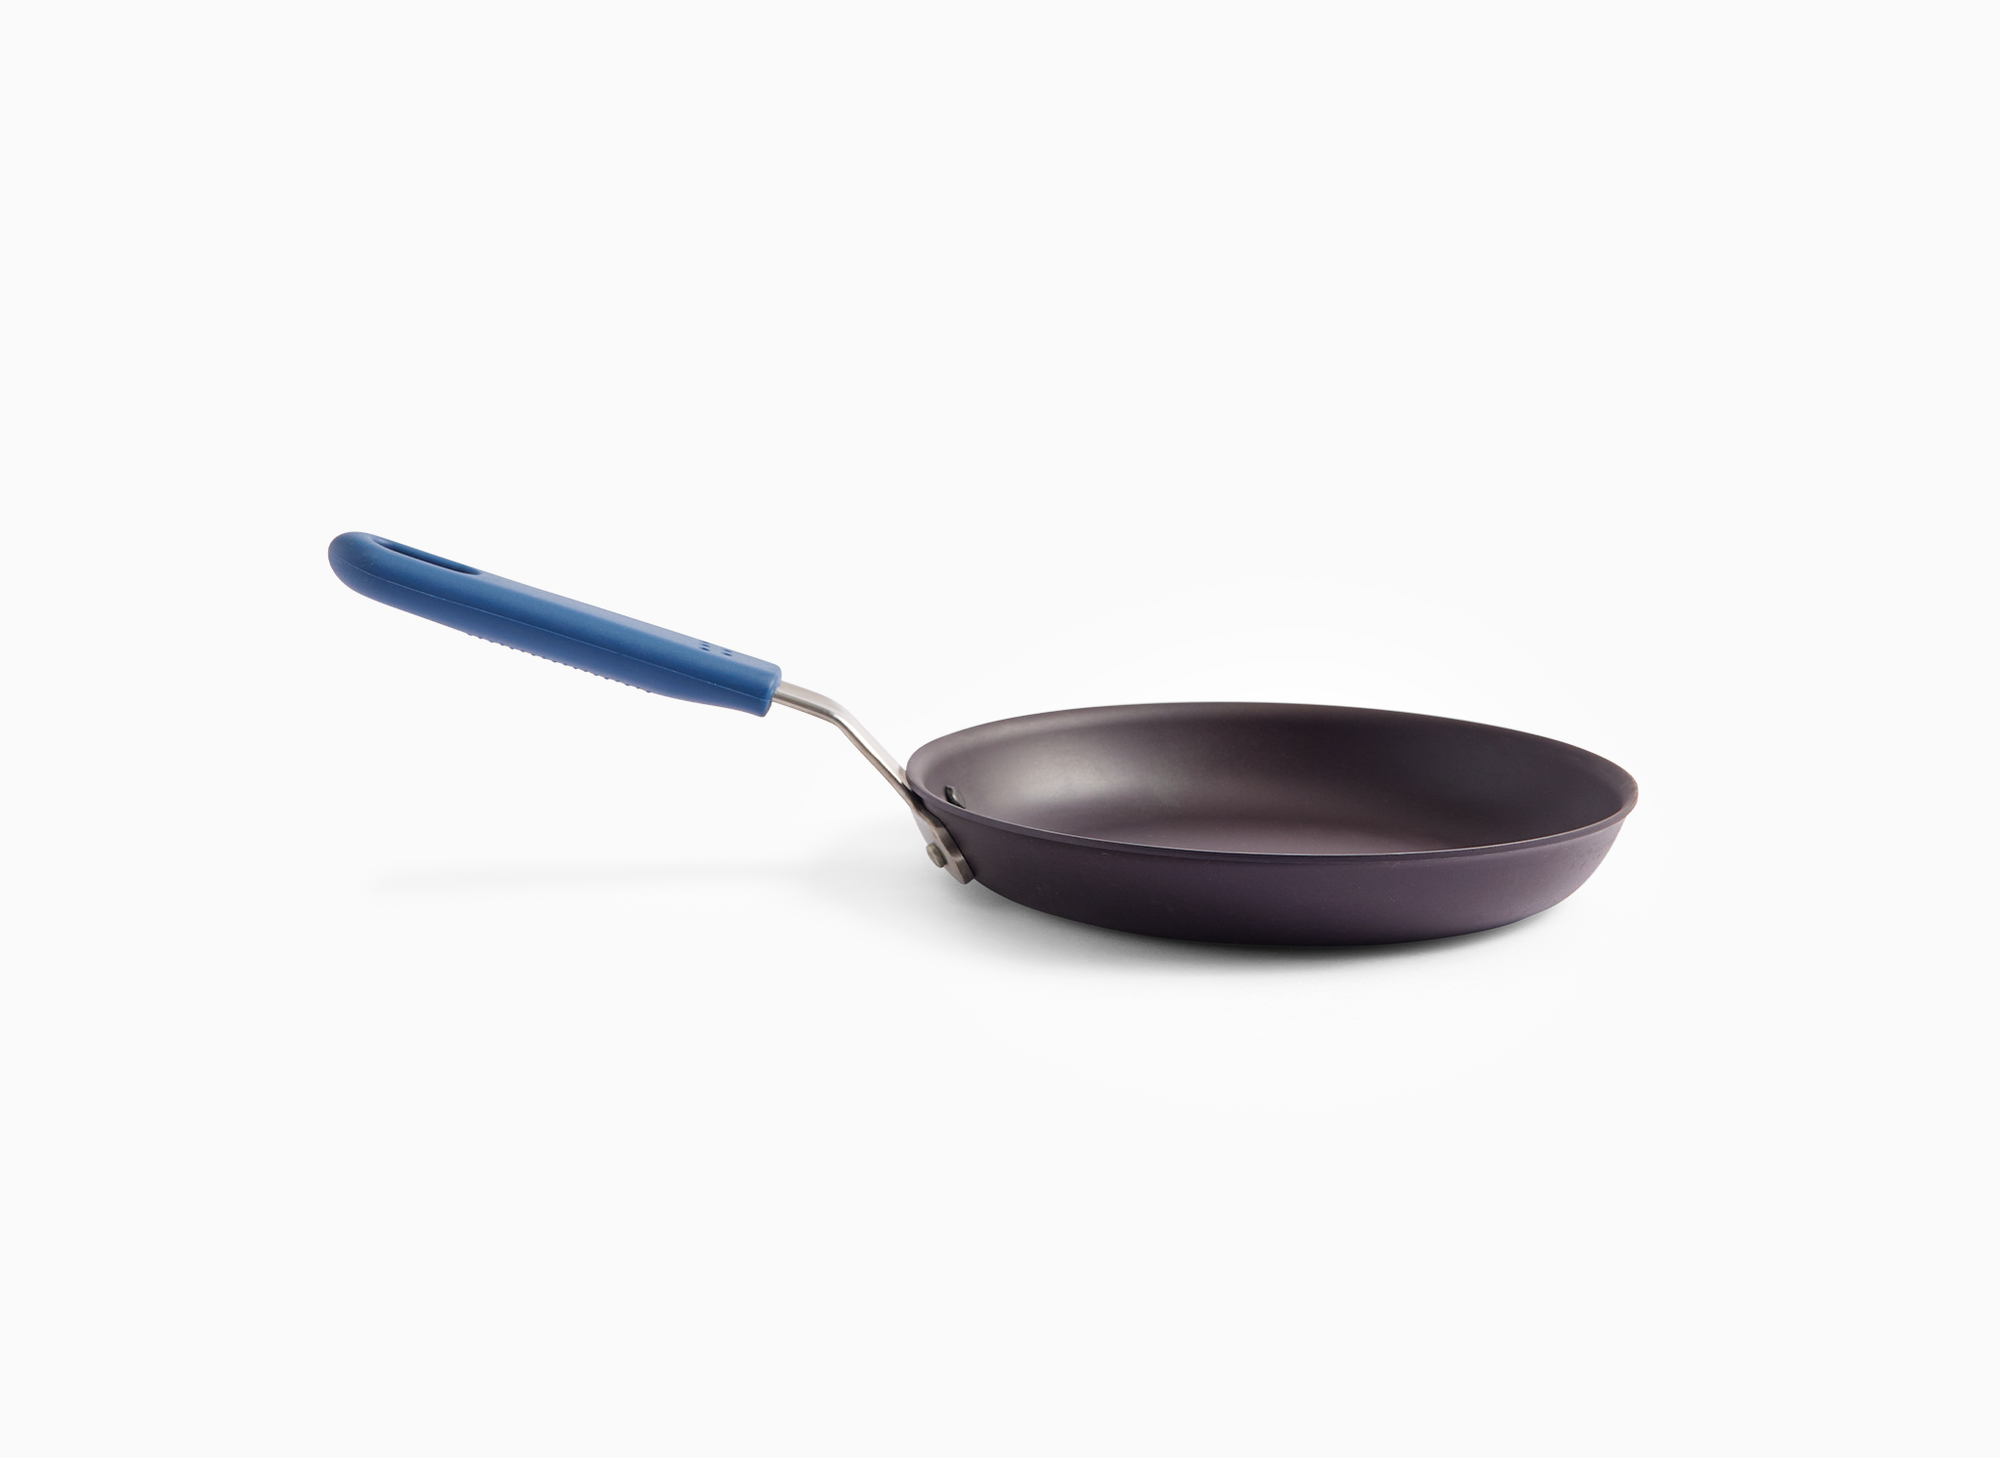 Replacement Removable Handle for Nonstick Cookware - Shop